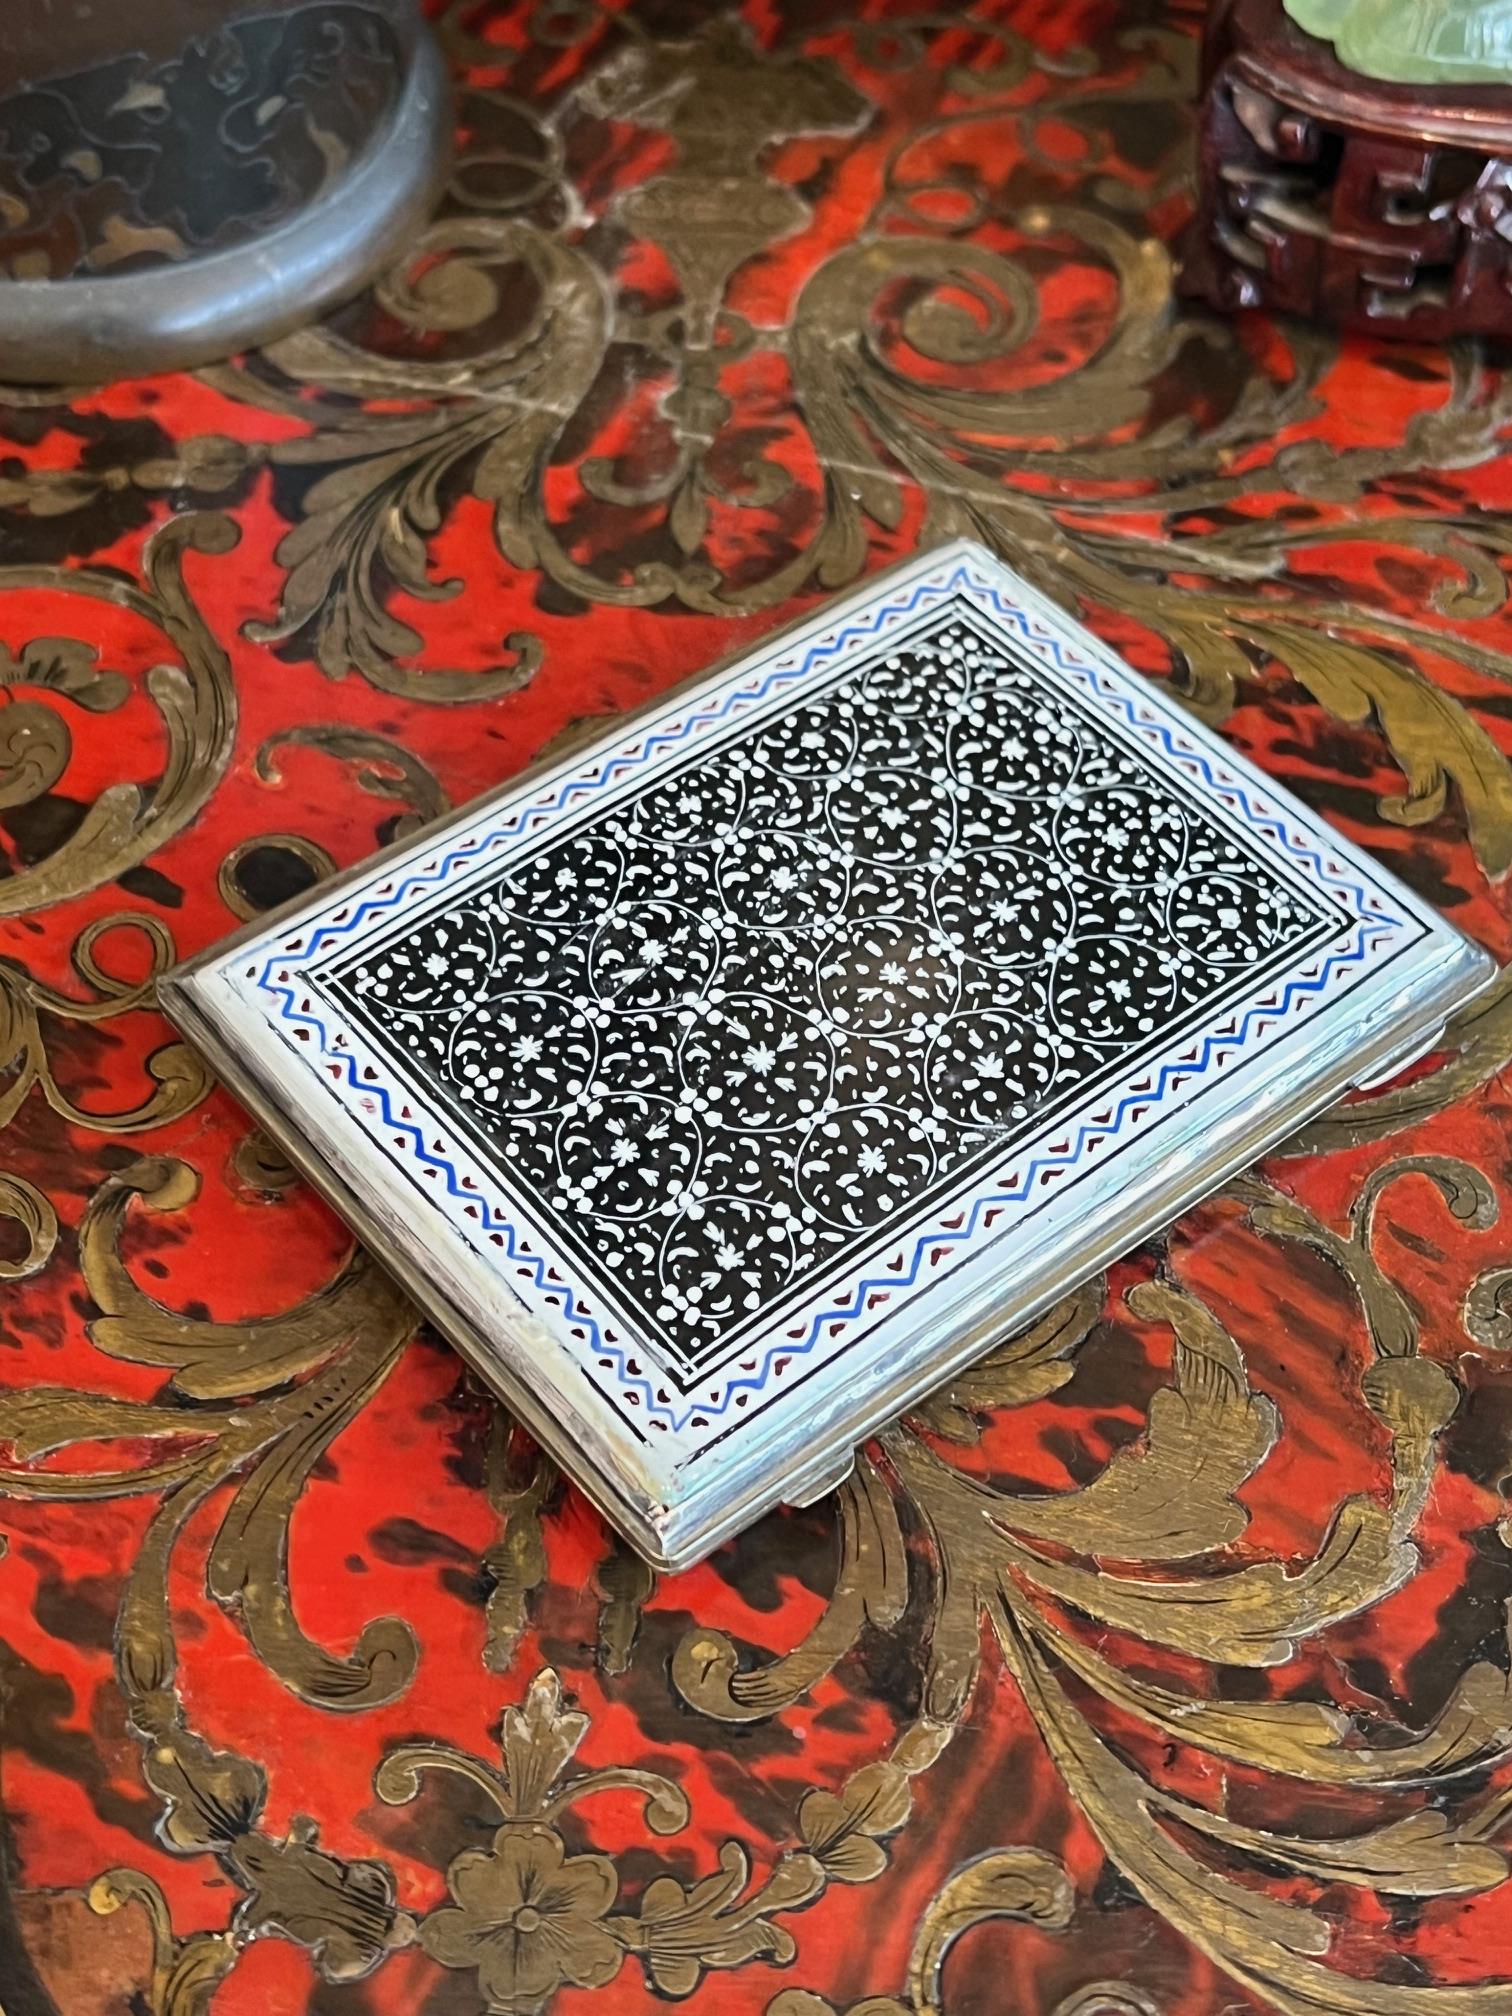 A PERSIAN SILVER AND ENAMEL DOUBLE SIDED CIGARETTE CASE - Image 3 of 3